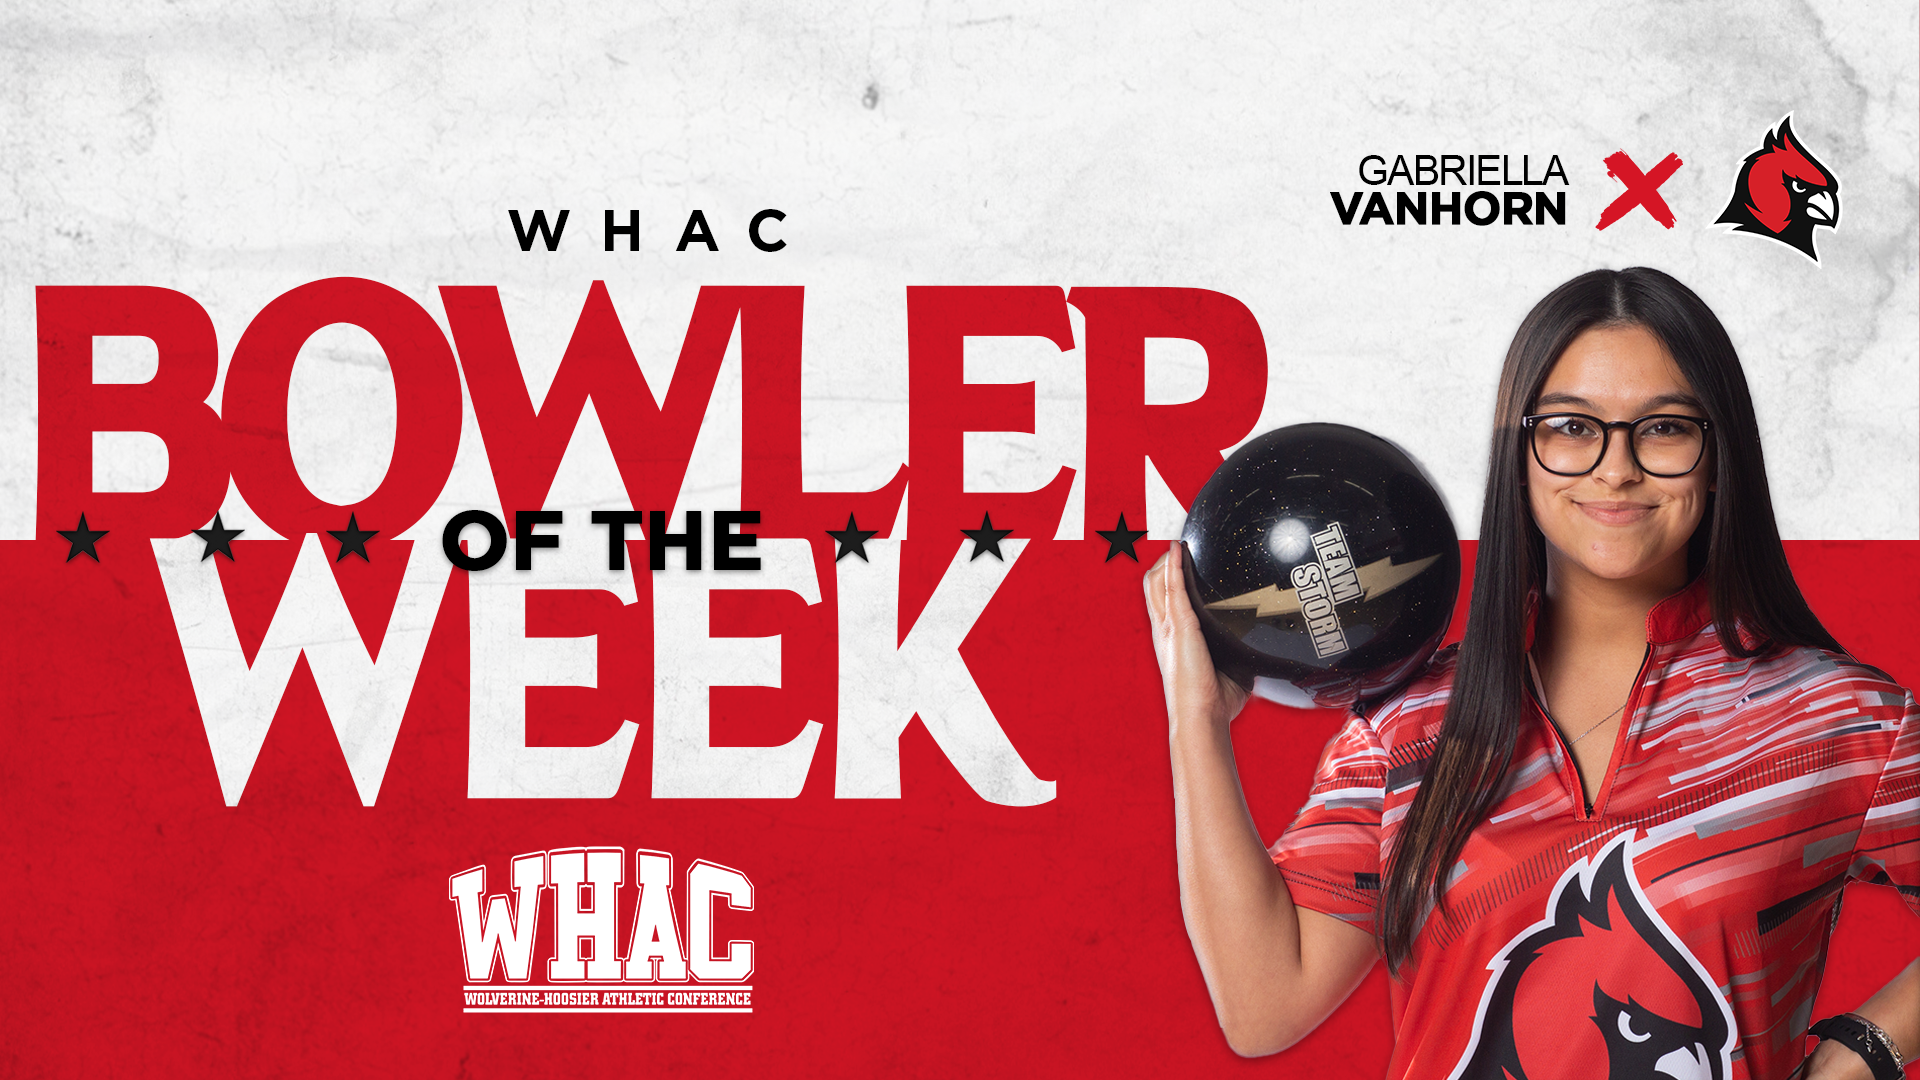 Women's Bowling VanHorn takes home second straight WHAC Bowler of the Week